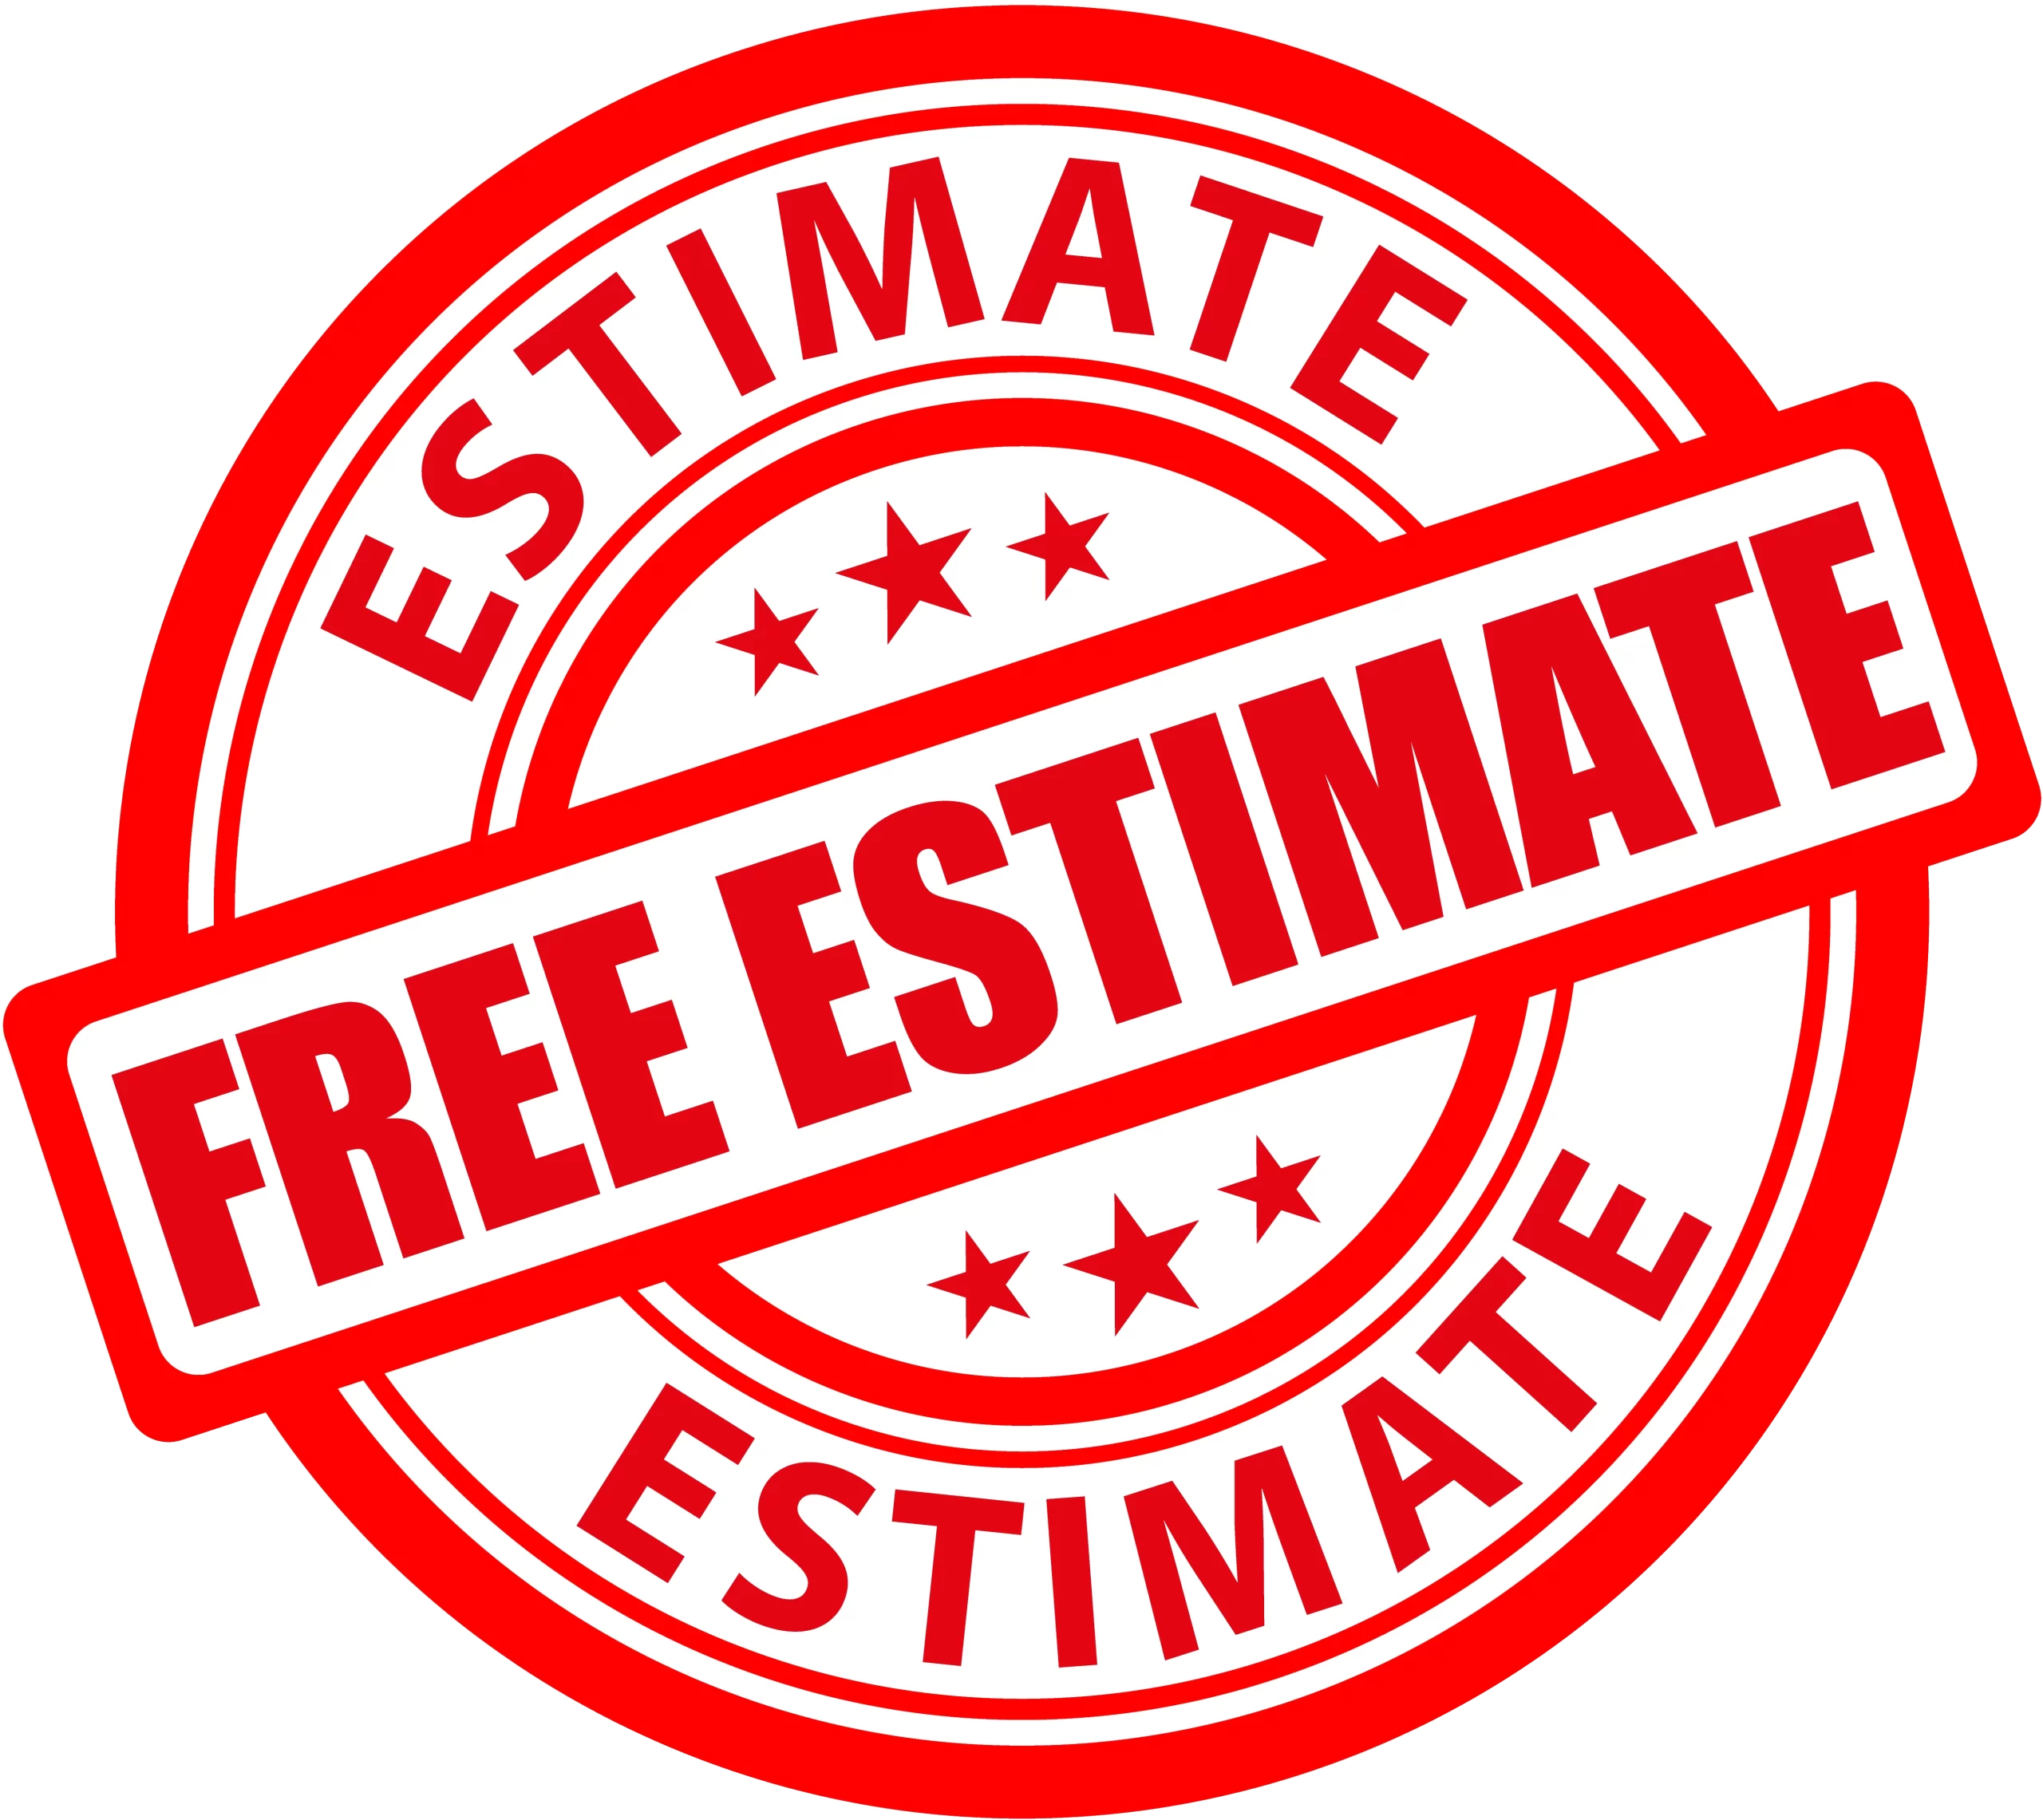 A red vector stamp with text that says Free Estimate.